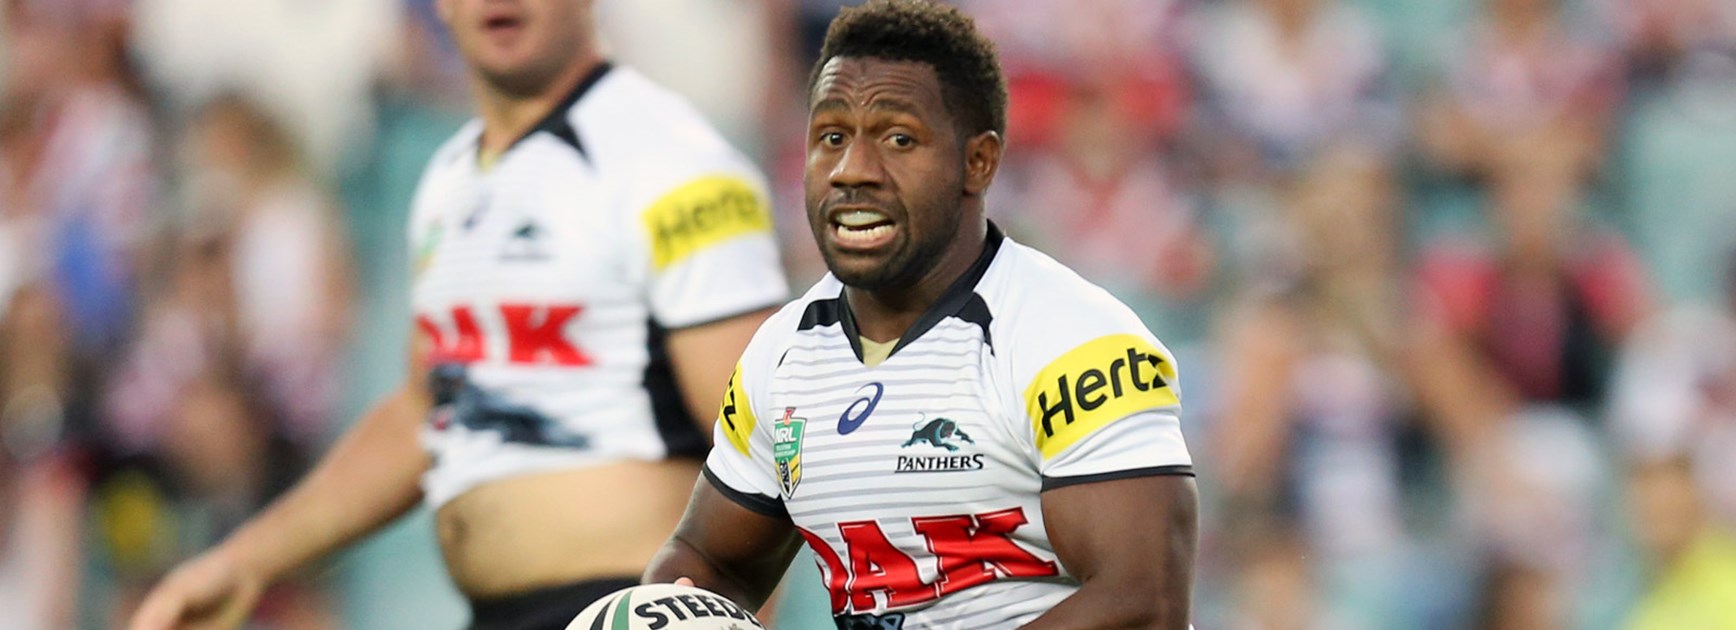 Panthers hooker James Segeyaro can't wait to represent Australia as part of the PM's XIII side.